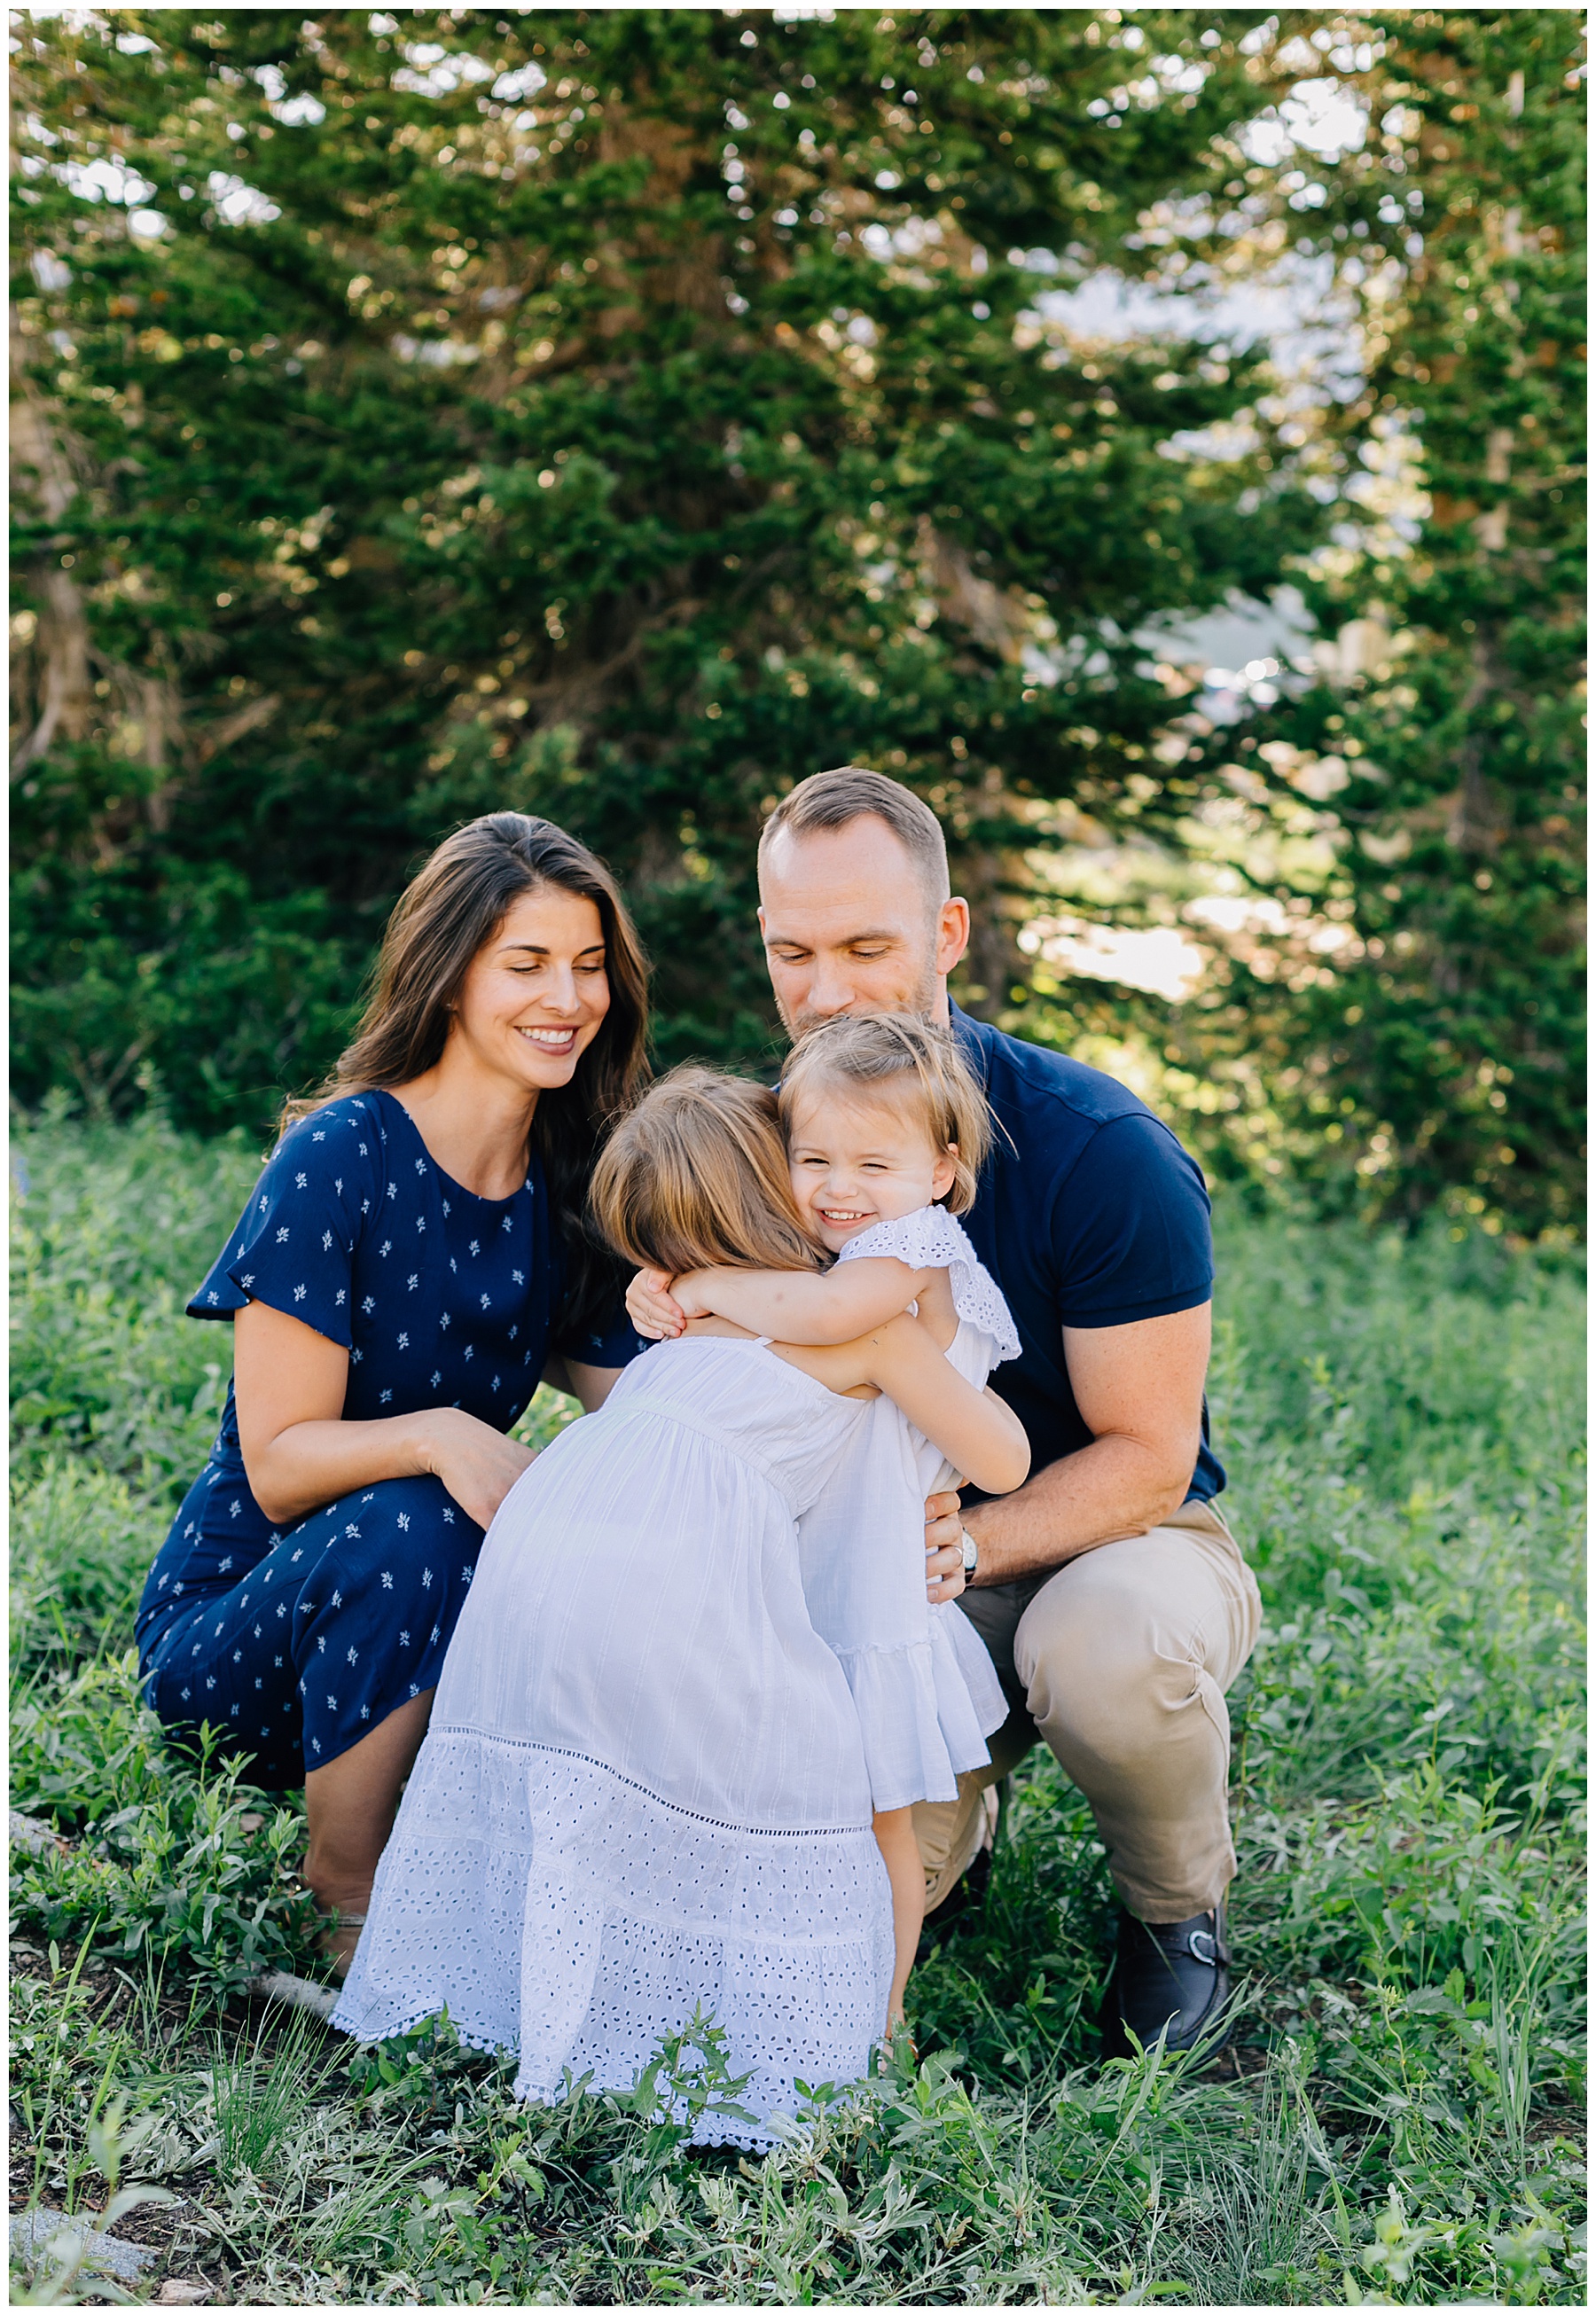 Little Cottonwood Canyon | Anderson Family Pictures | Utah Photographer